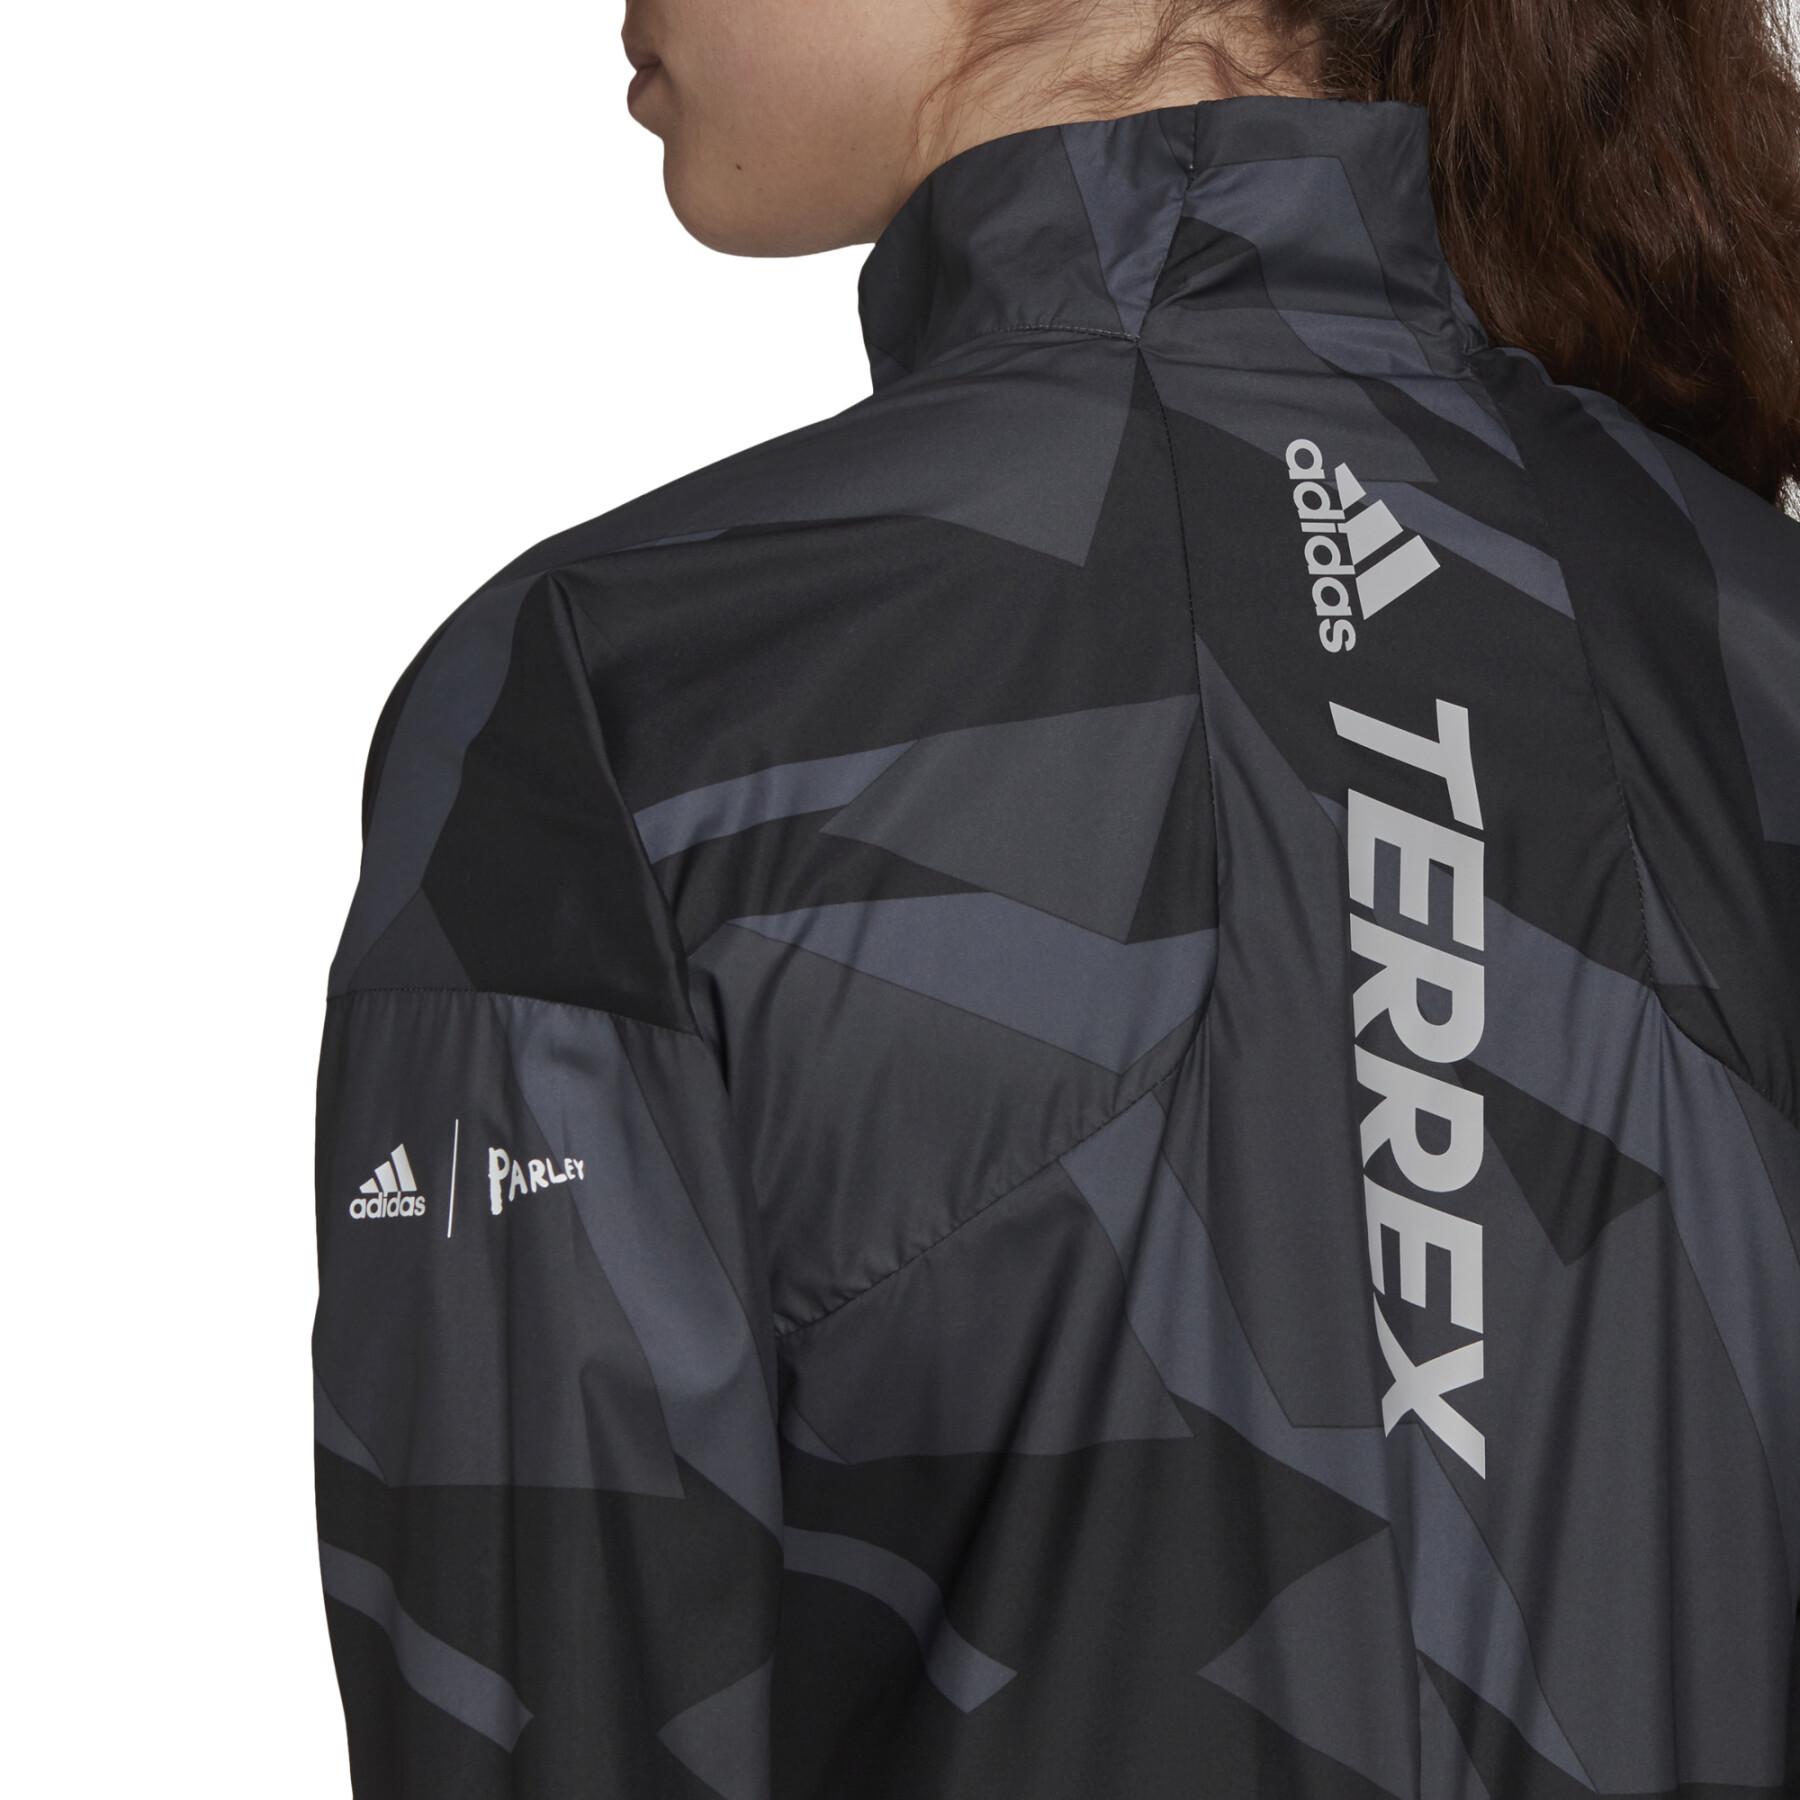 Veste coupe-vent femme adidas Terrex Parley Agravic Trail Running